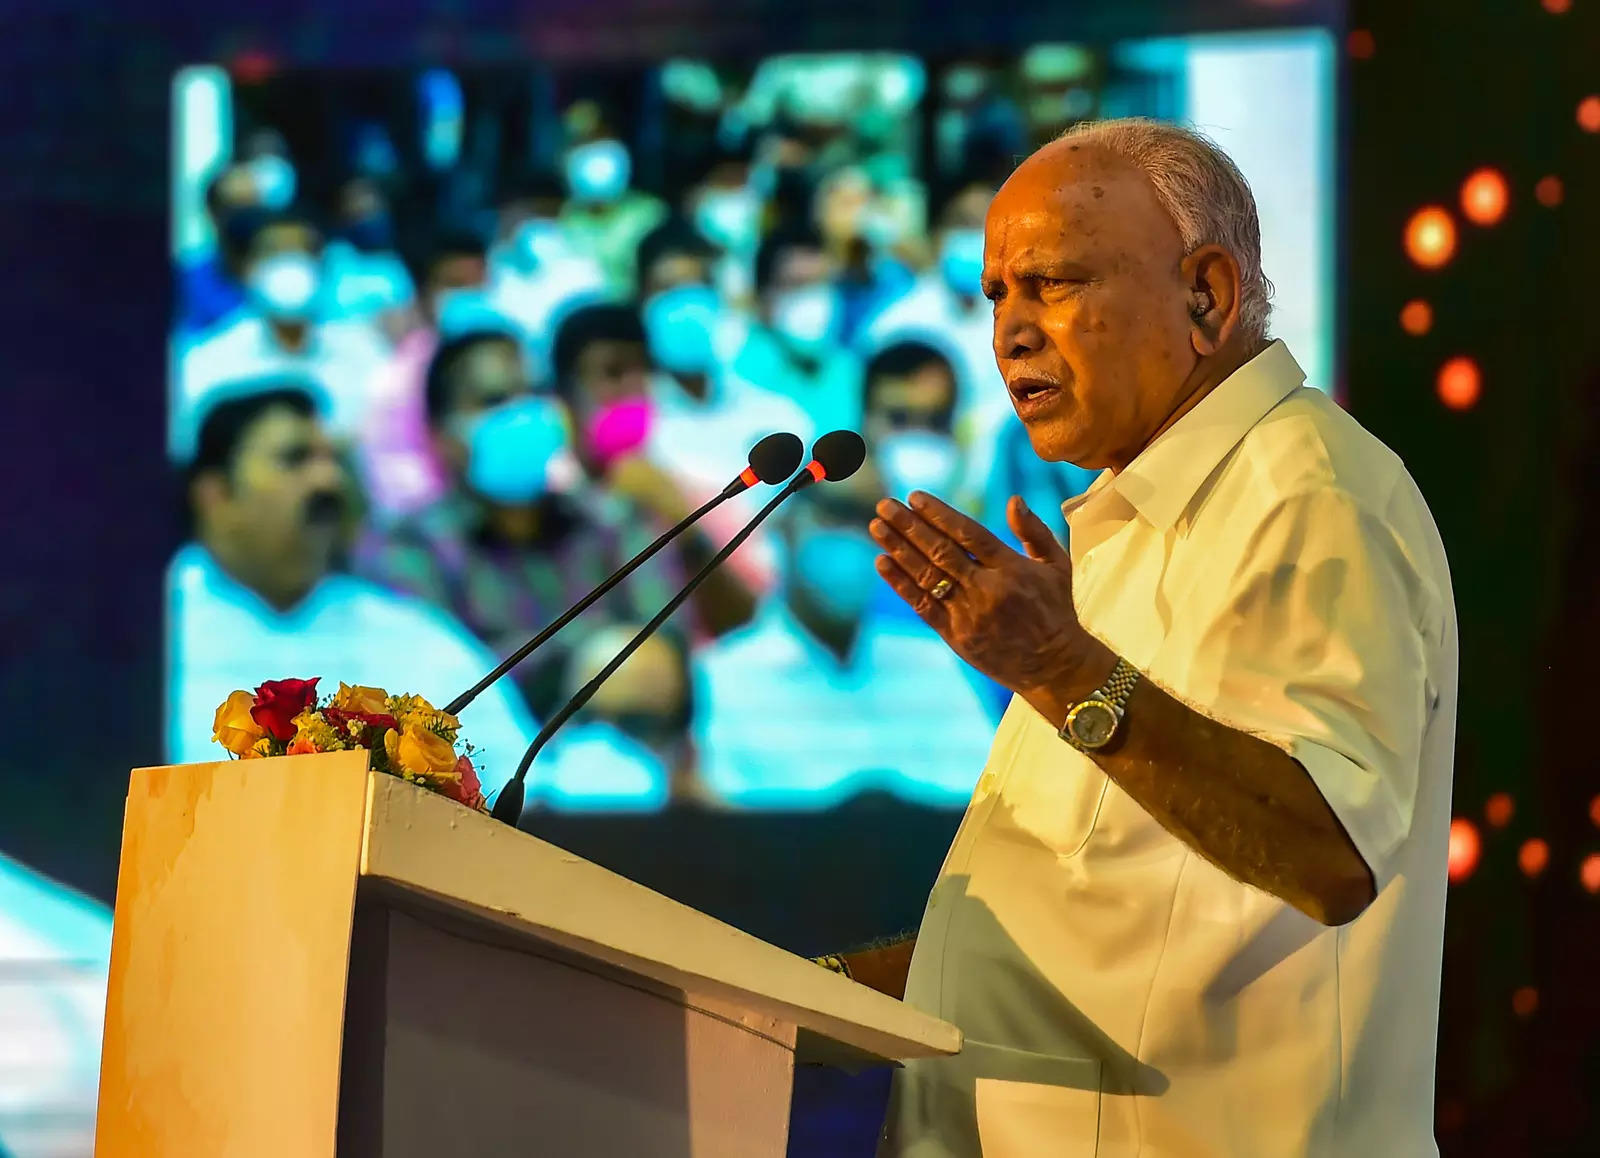 Yediyurappa, soon after his Maldives break last week, gave clear signs of returning to active politics. (PTI file photo)